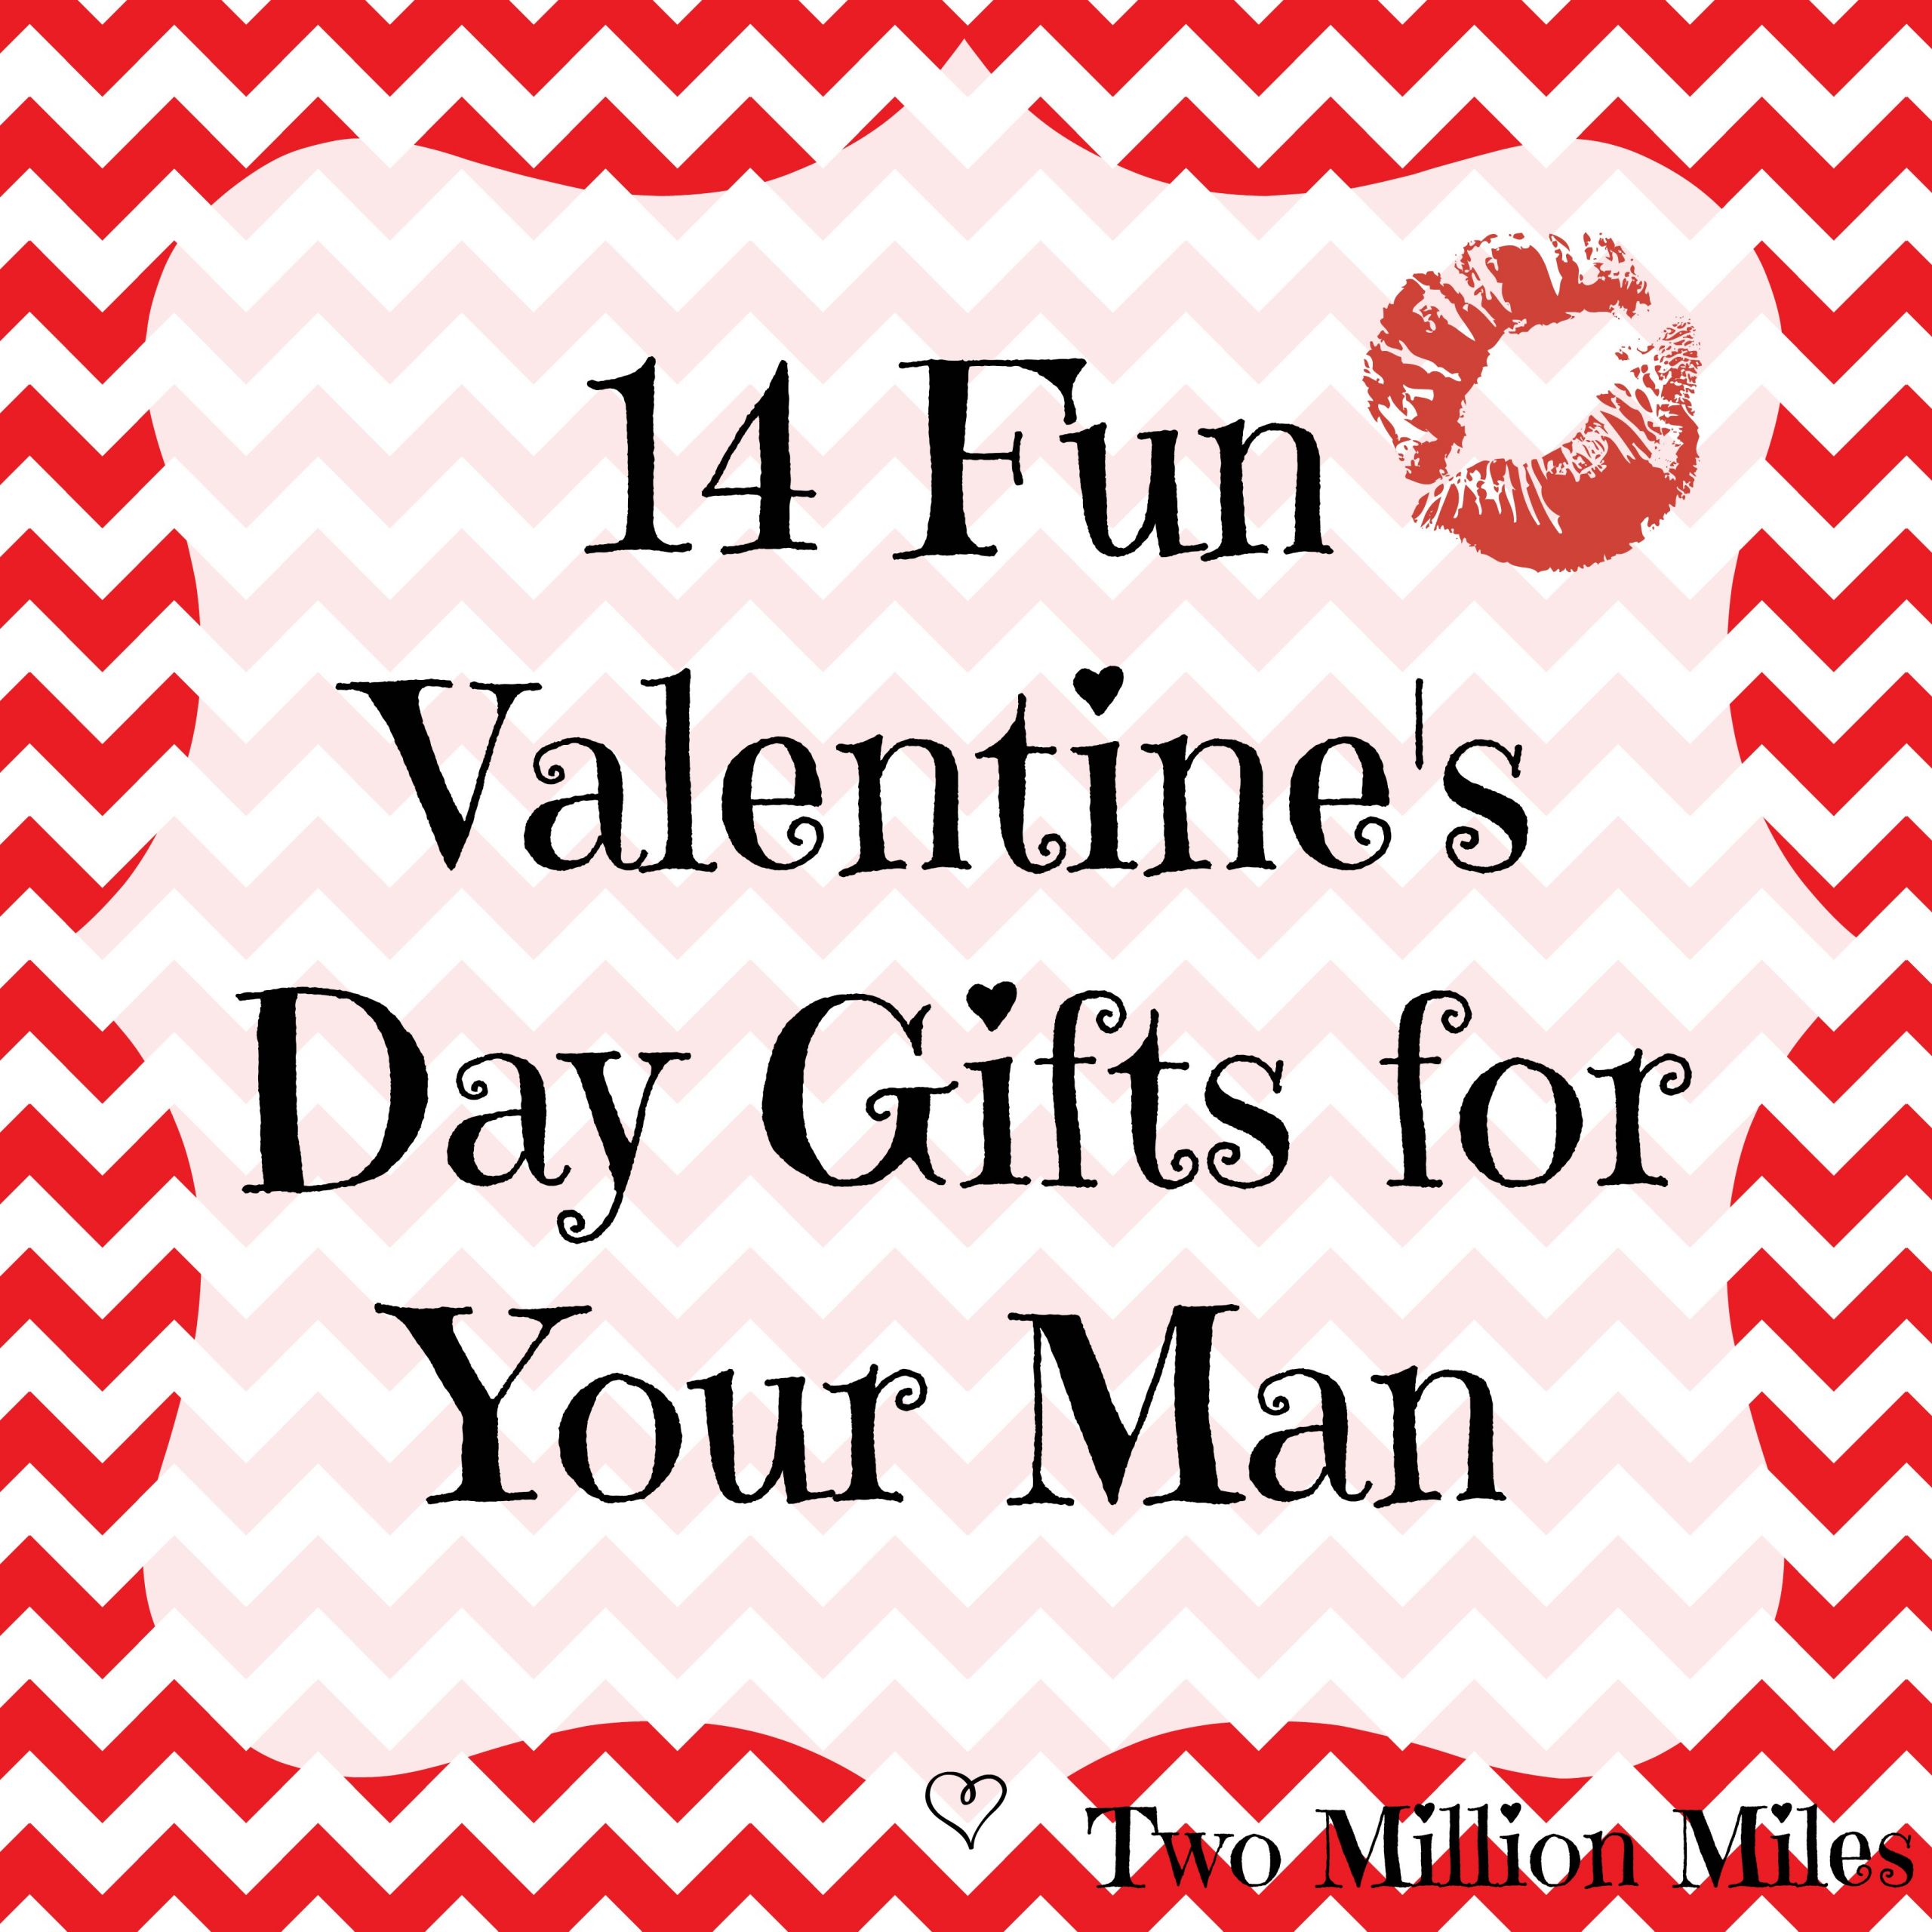 Valentines Guy Gift Ideas
 14 Valentine’s Day Gifts for Your Man